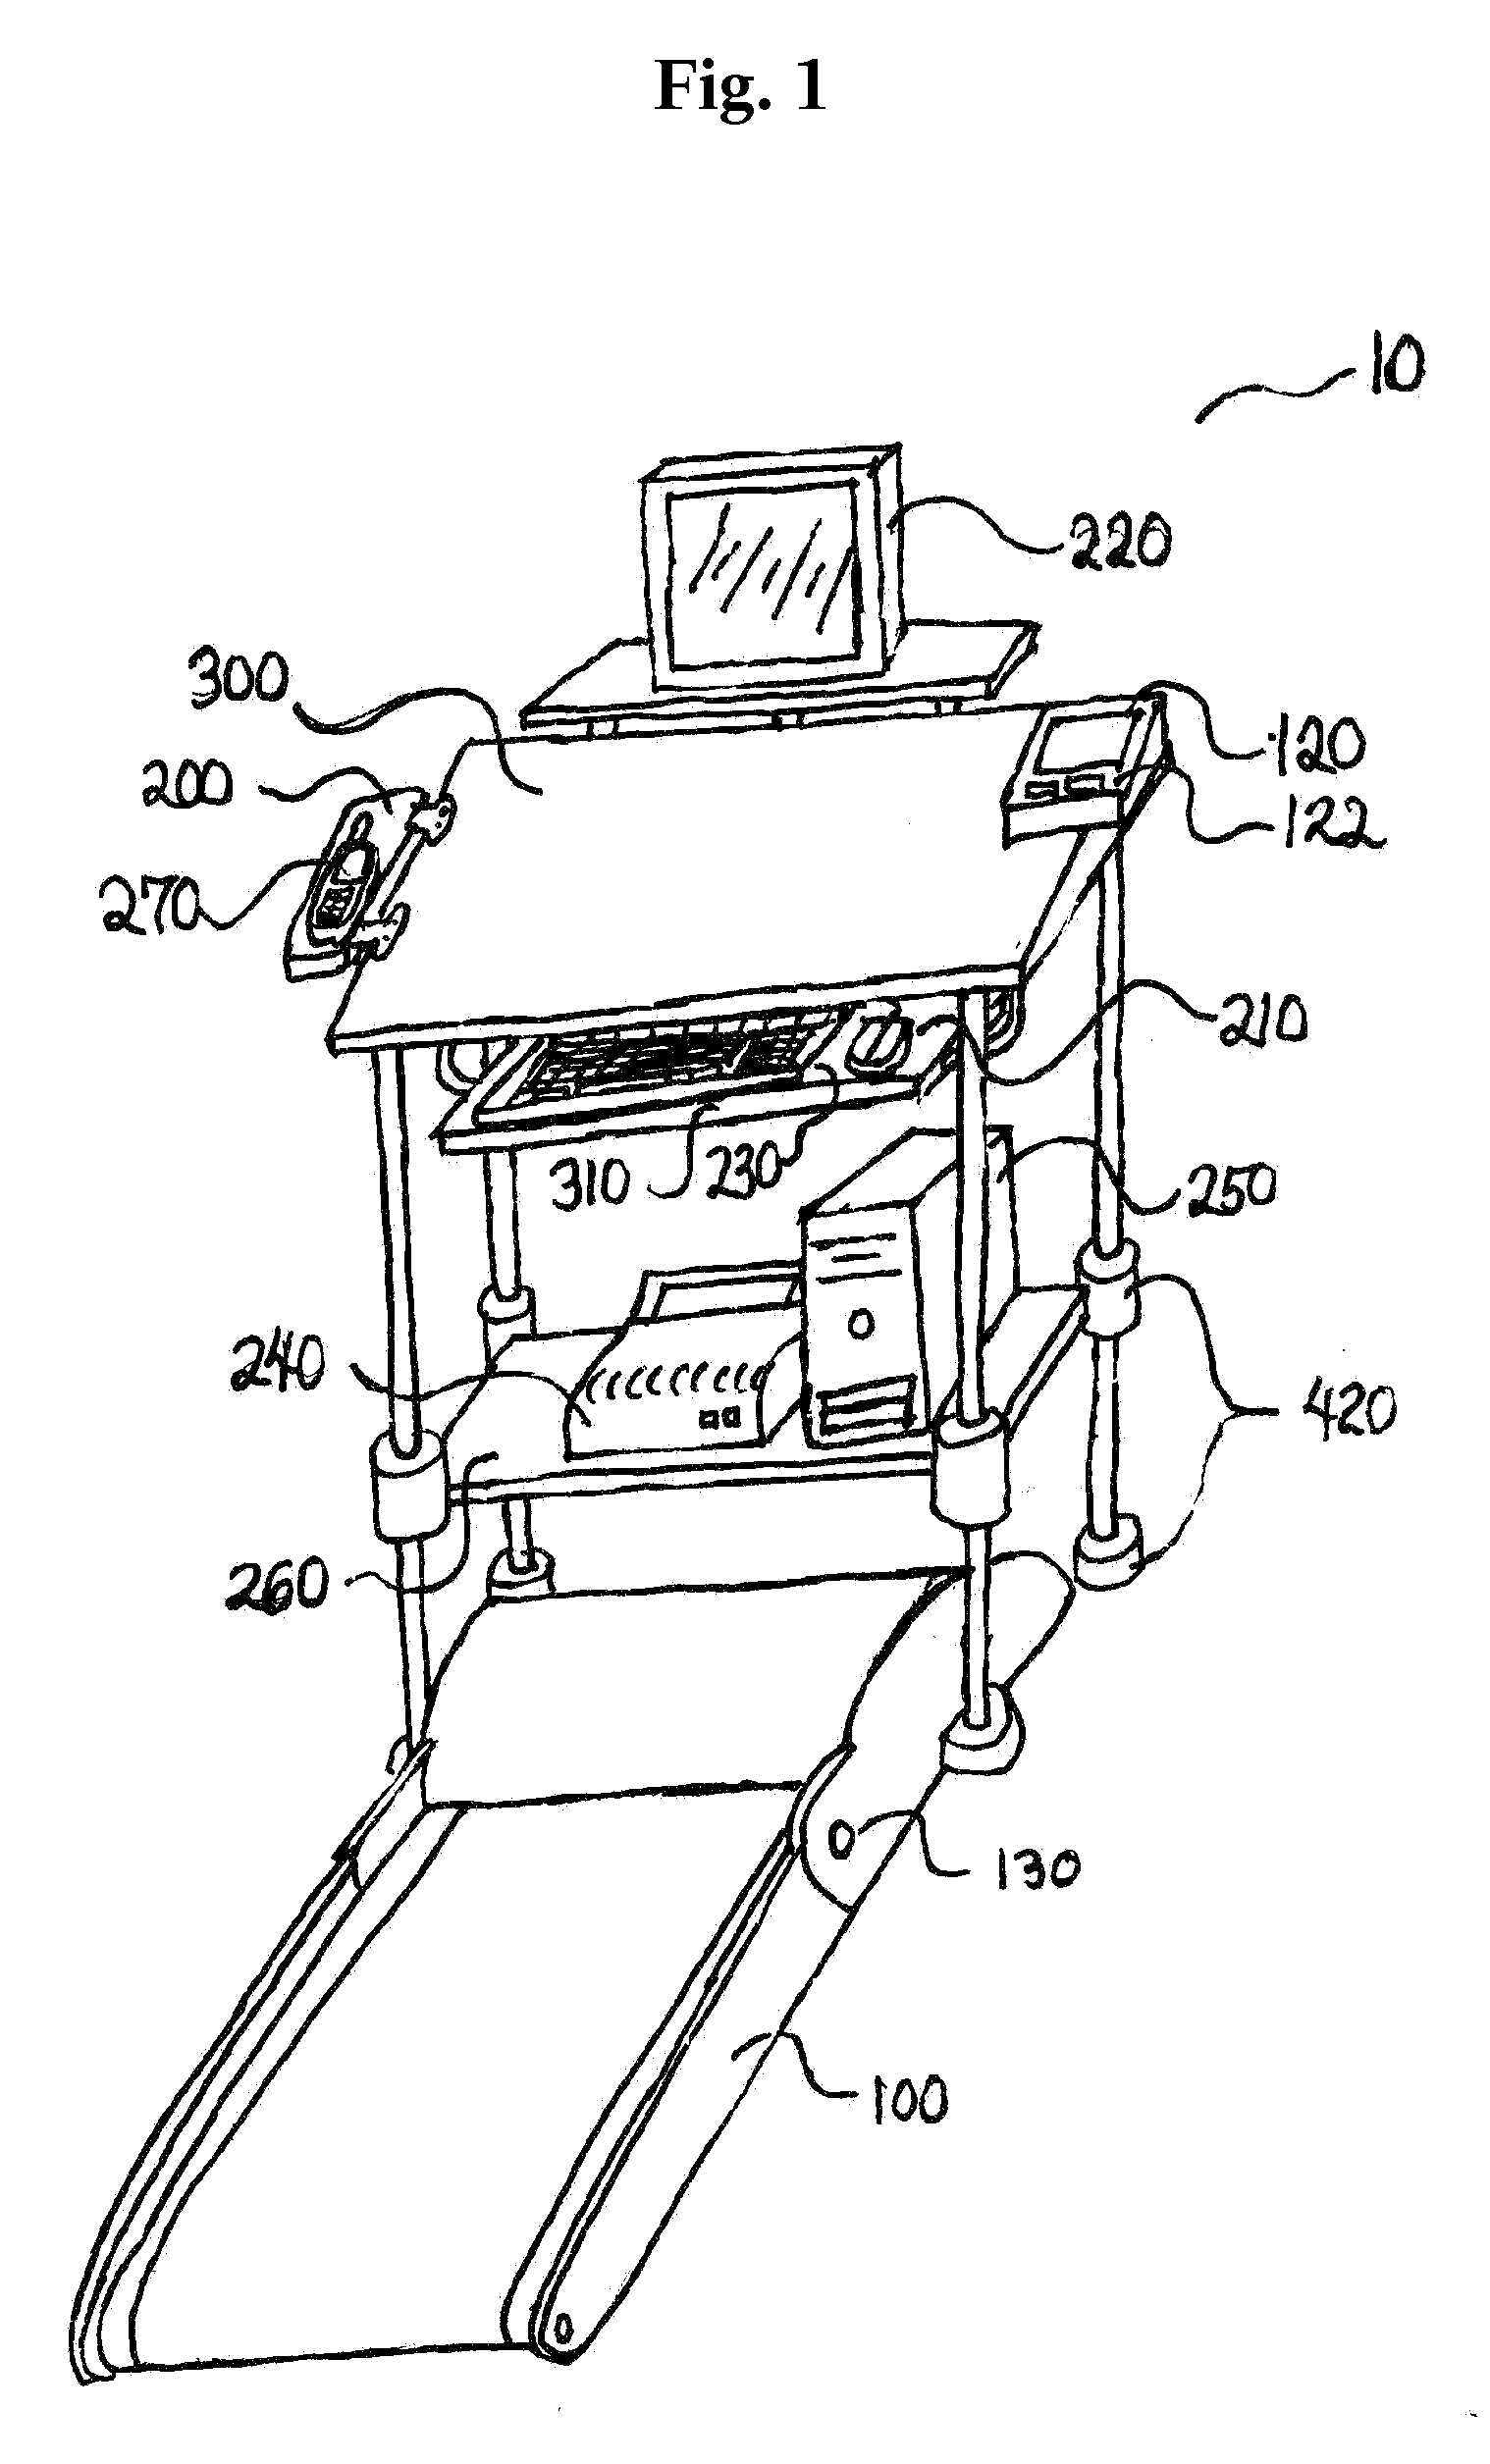 Exercise Apparatus with Computer Workstation